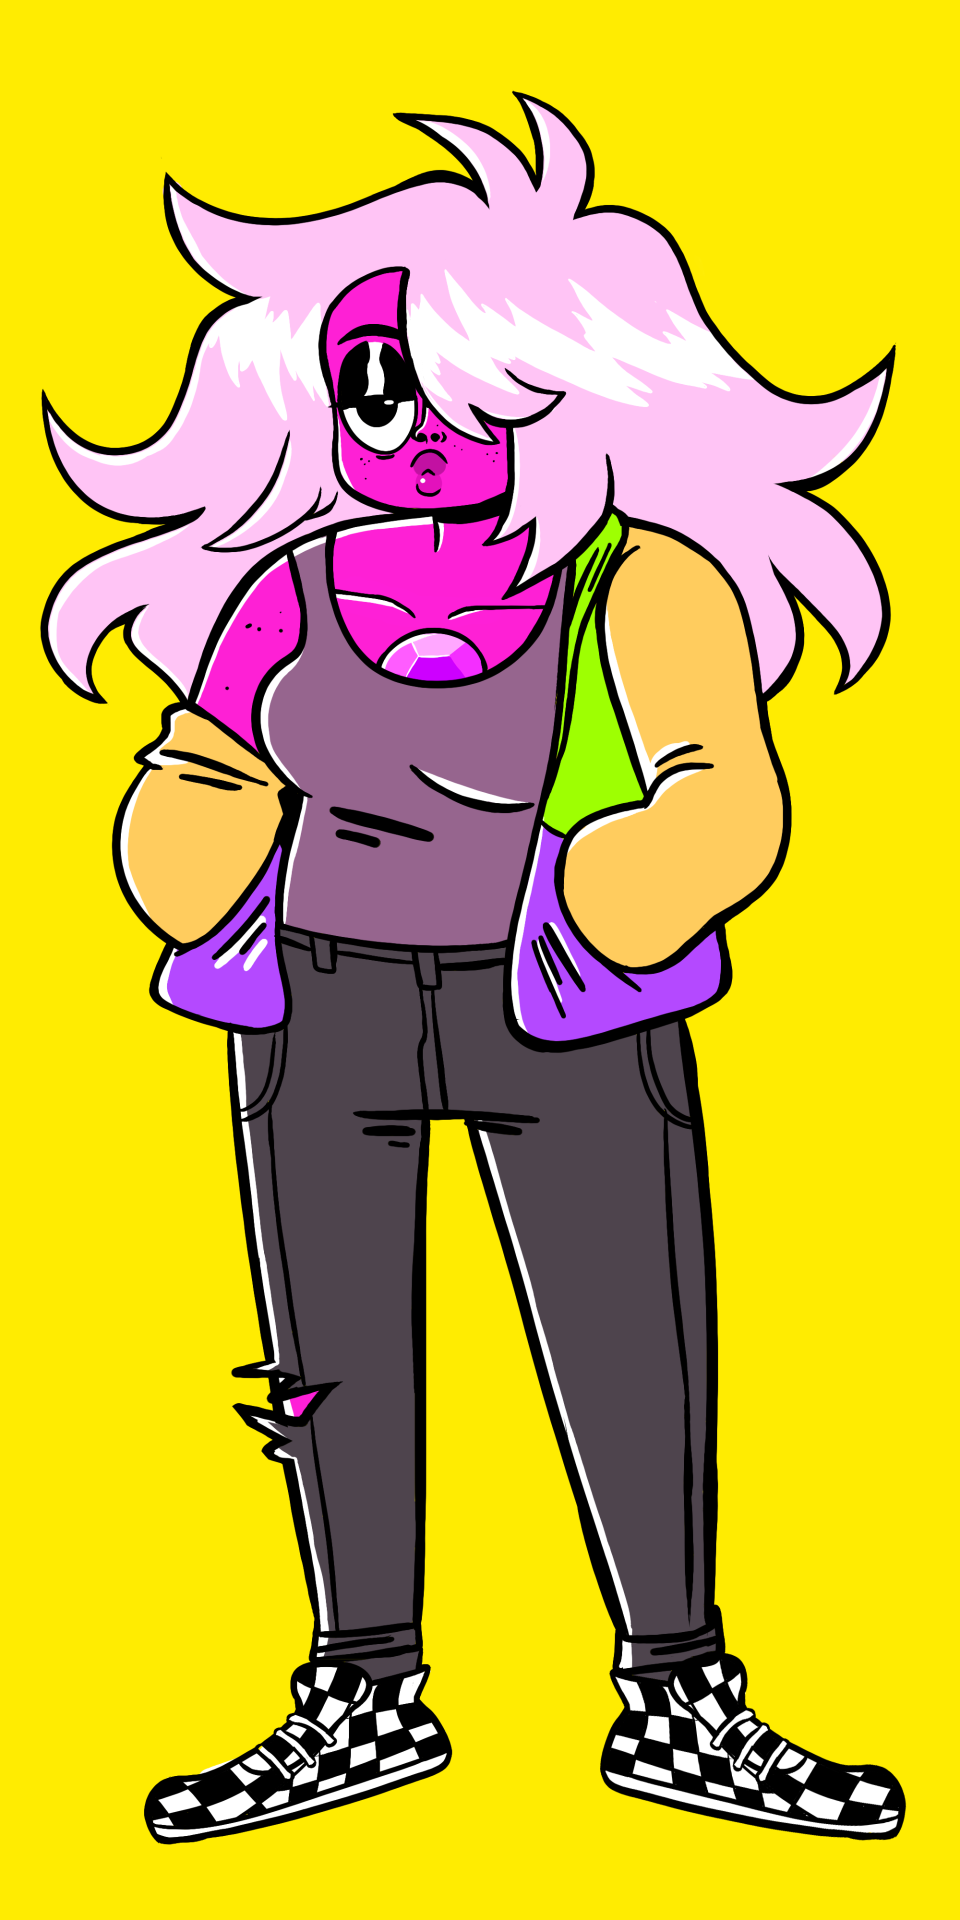 amethyst wearing some funky clothes